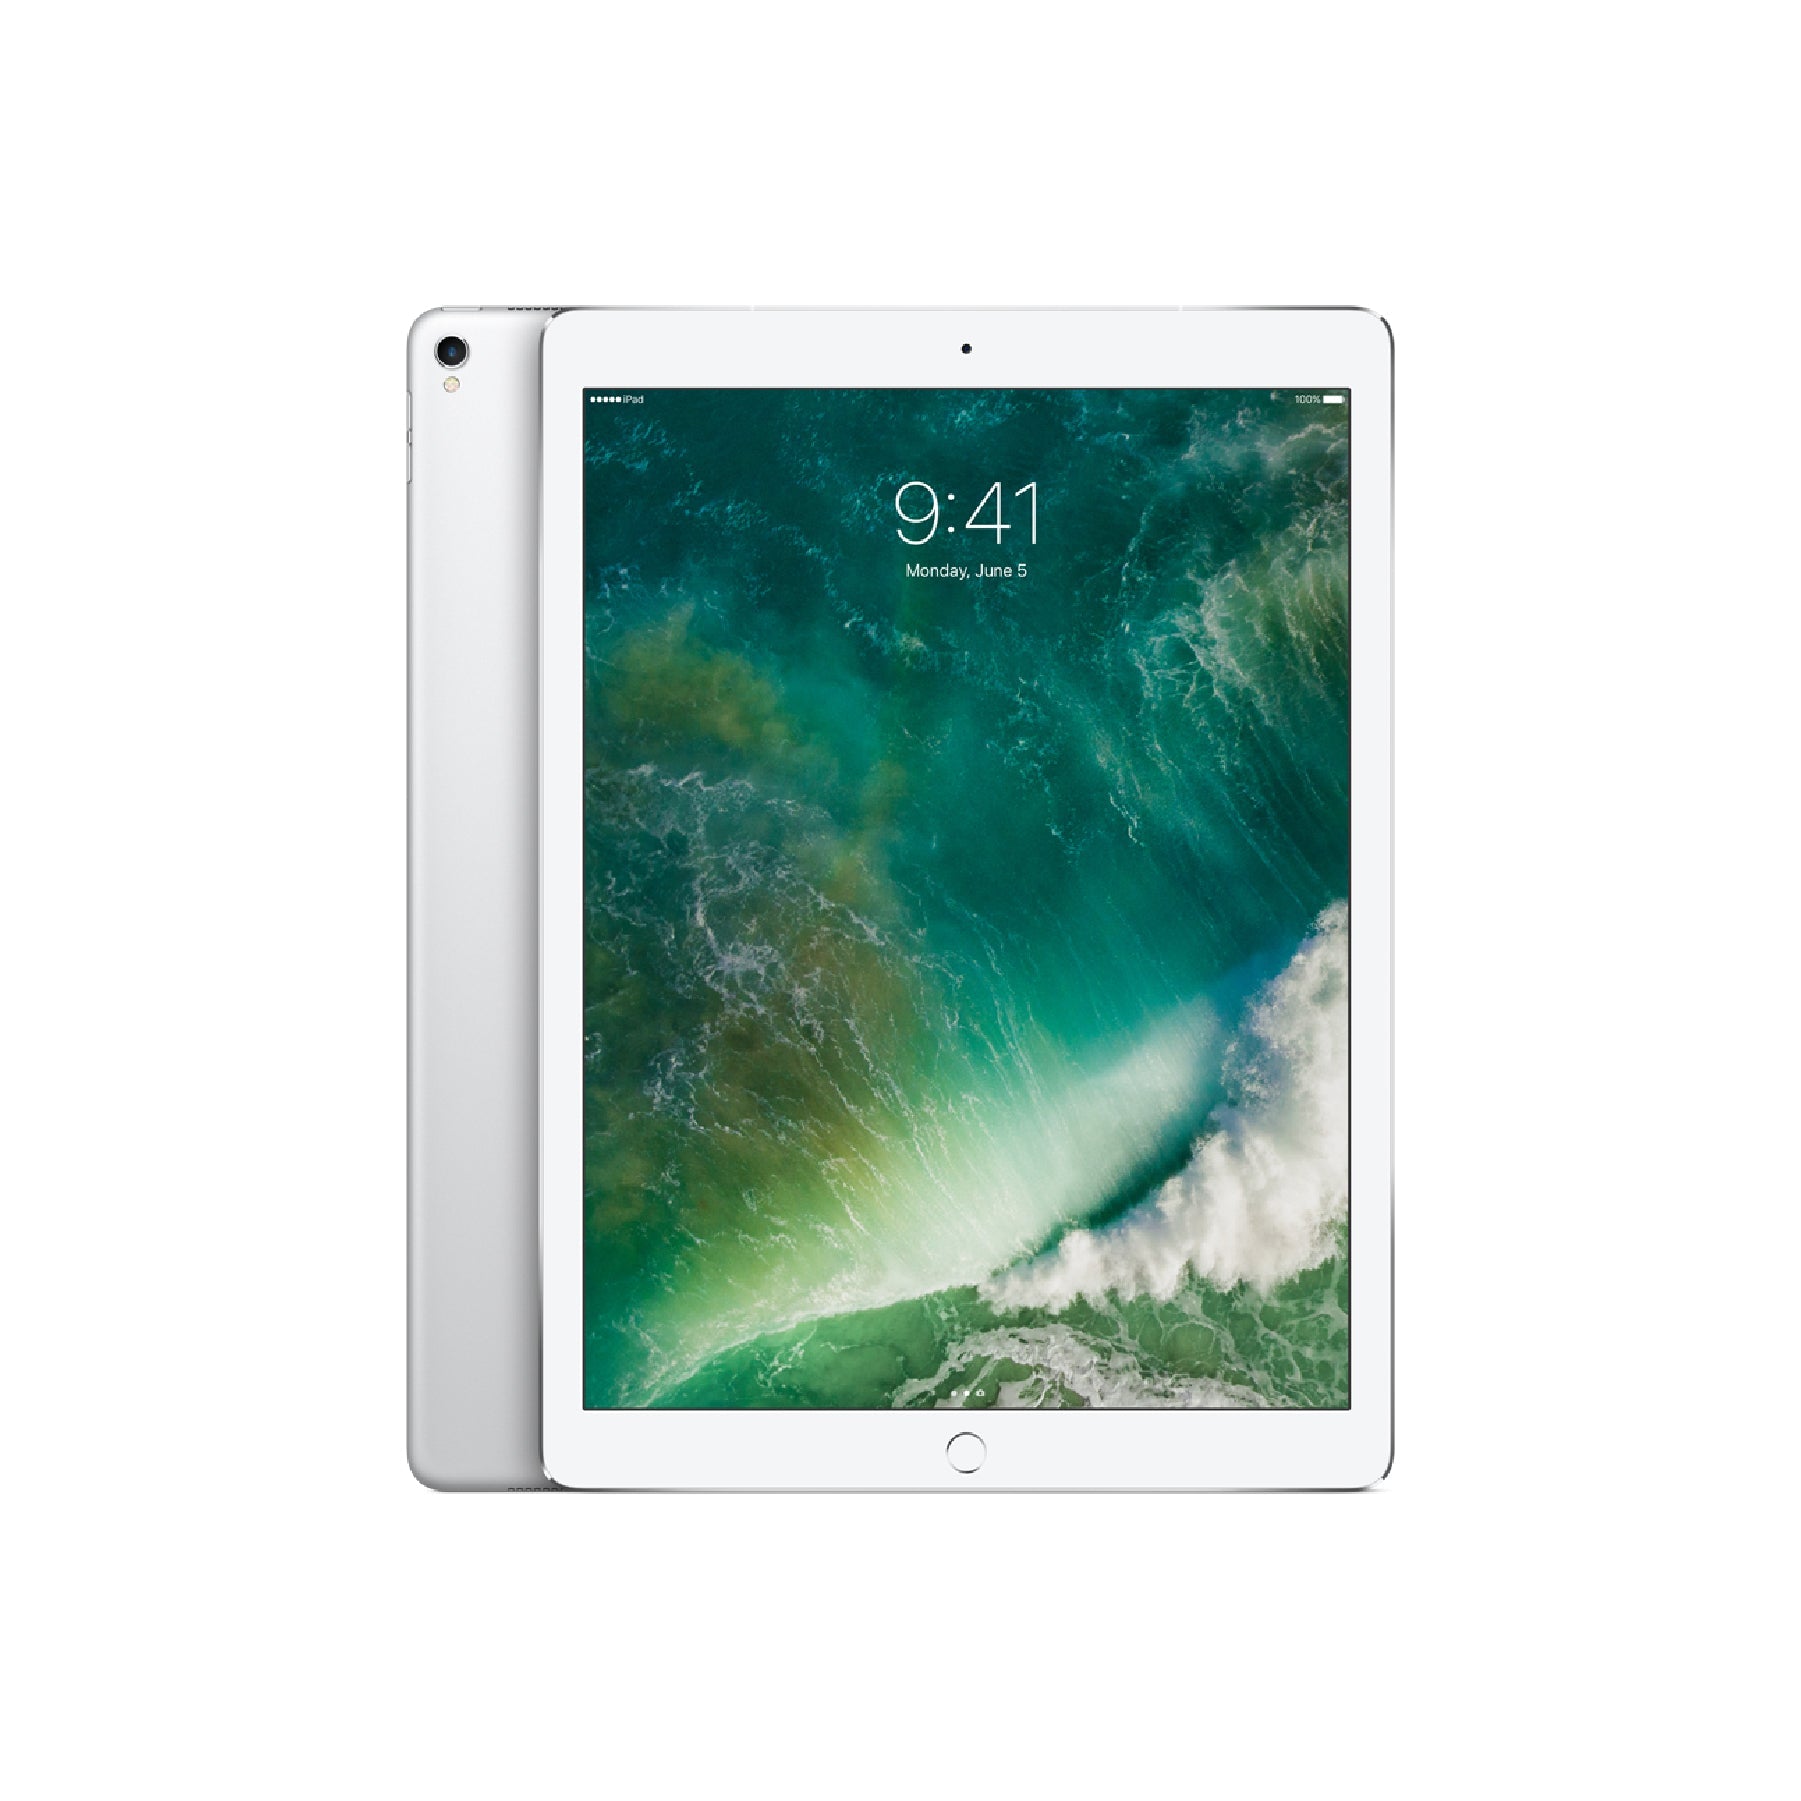 iPad Pro (9.7-inch, 2016) Wi-Fi - iStore Pre-owned